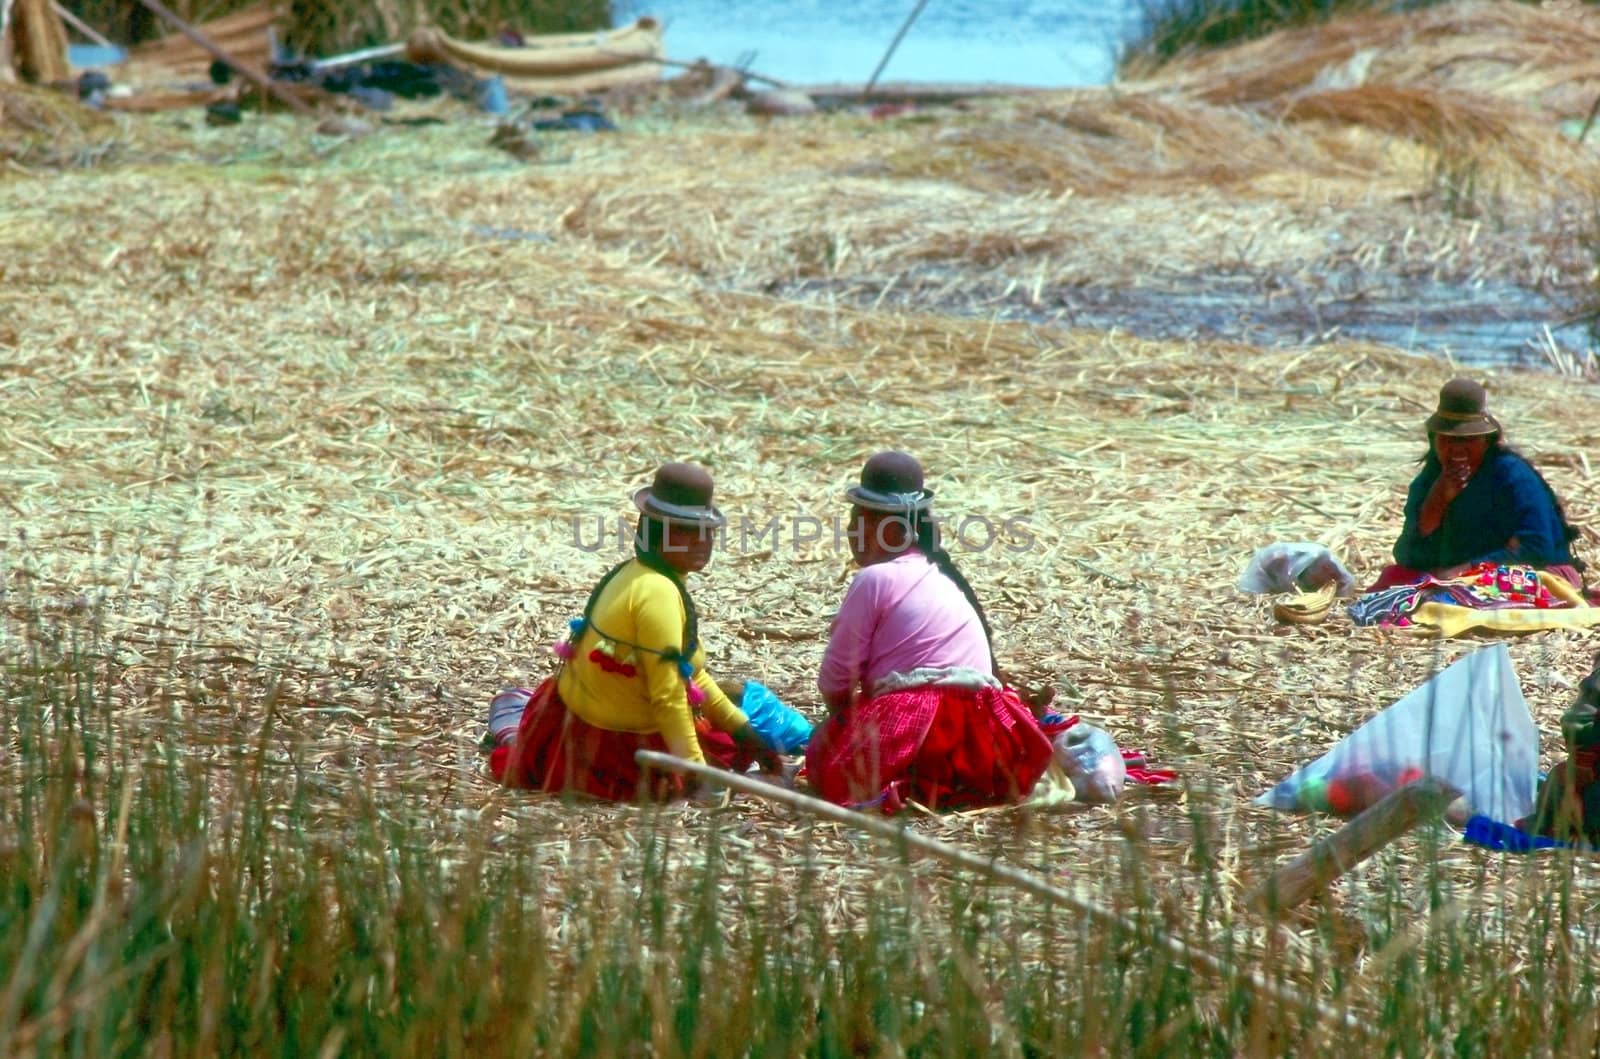 Lake Titicaca in Peru with floating islands made from totora reeds